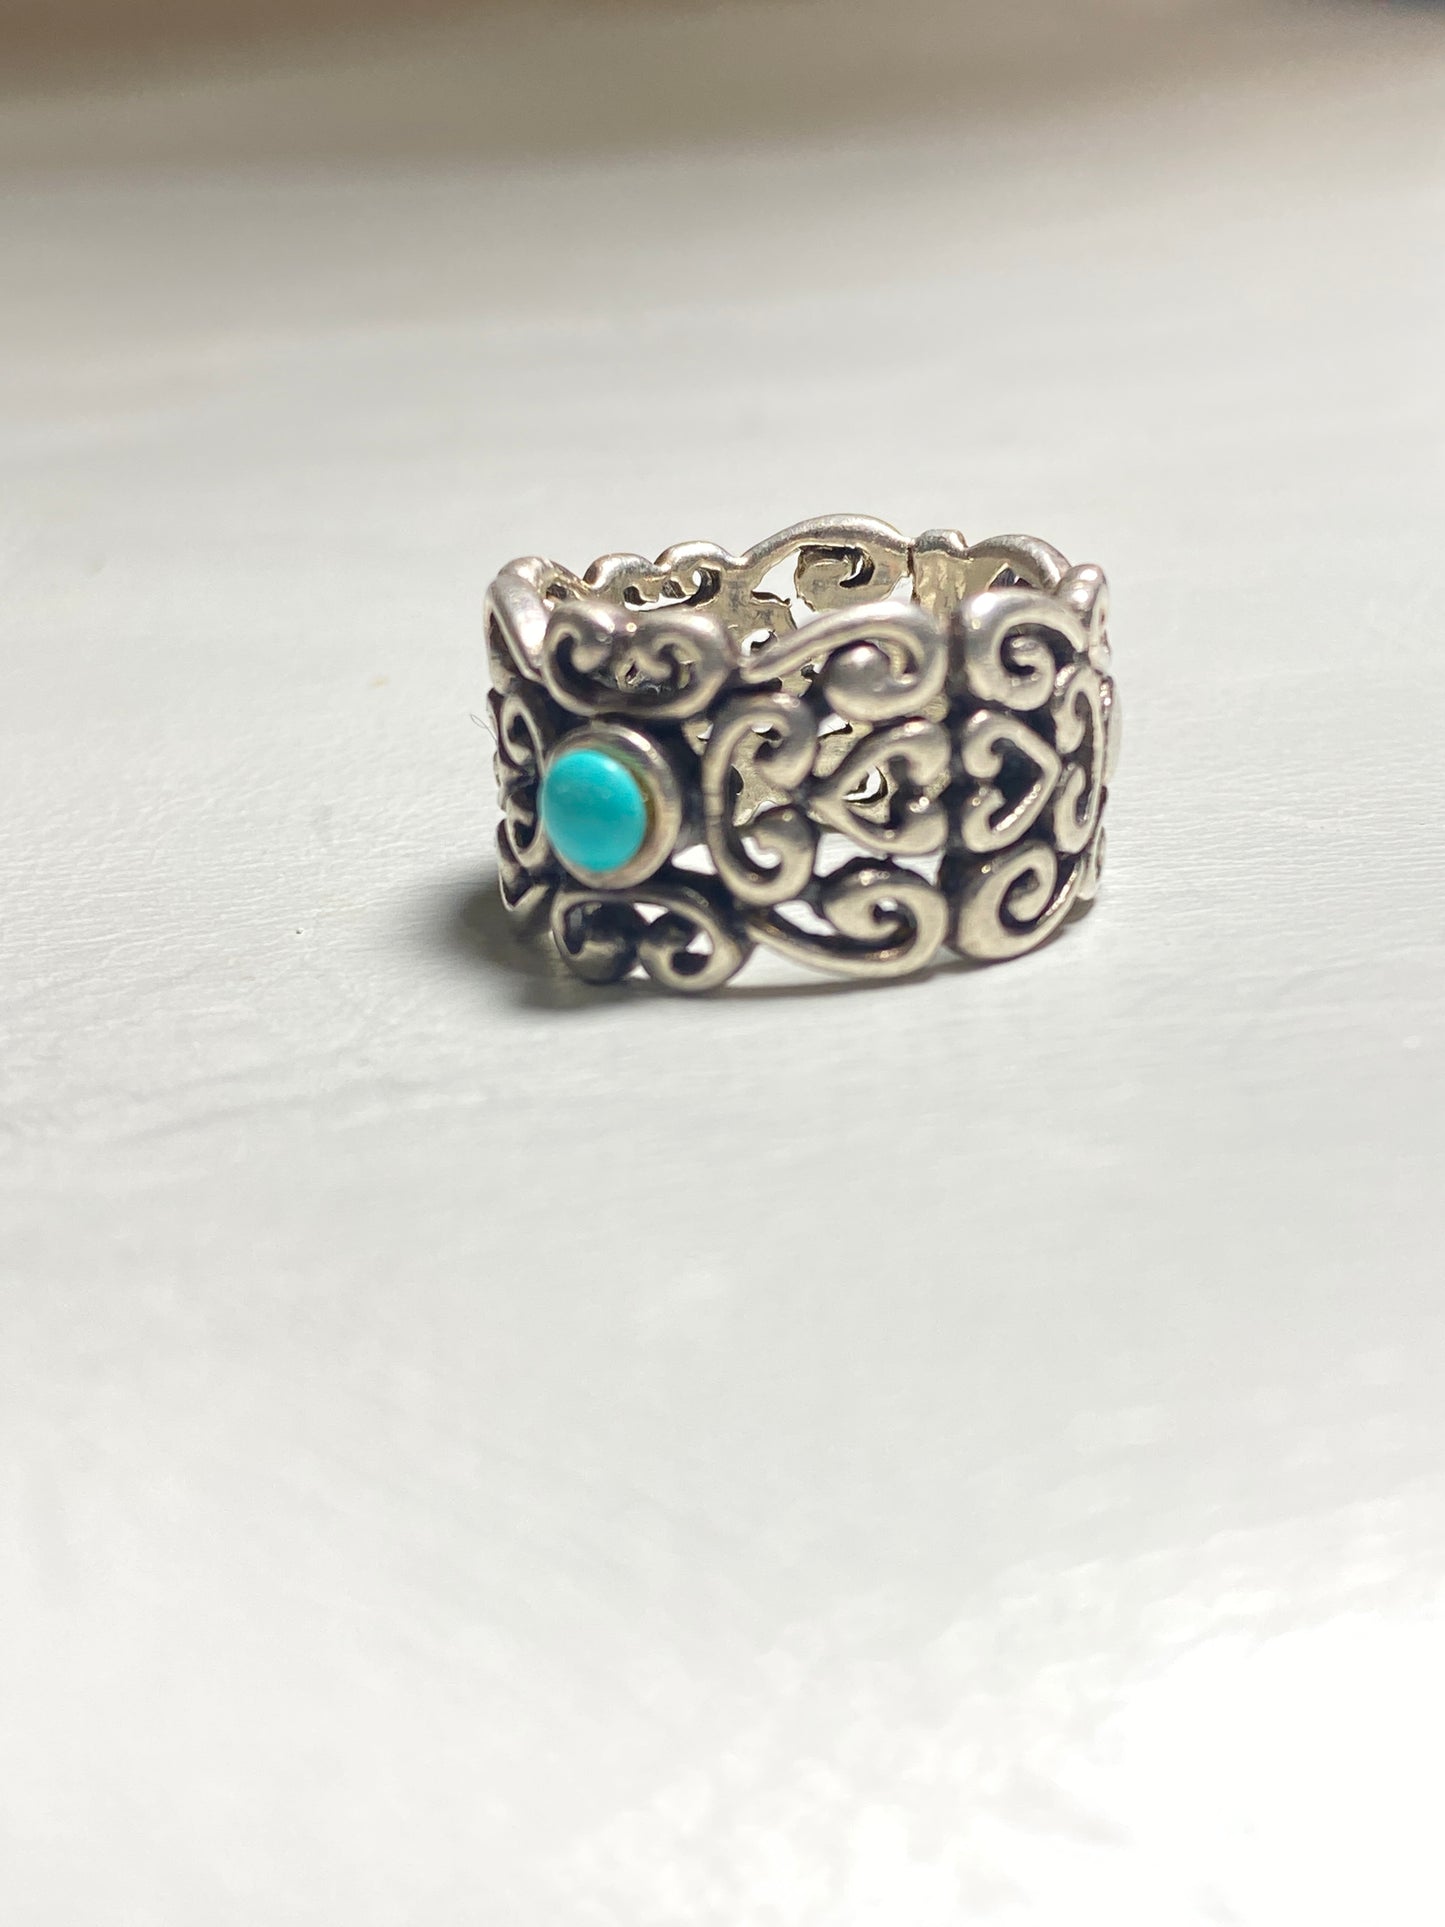 Turquoise ring heart band sterling silver women girls